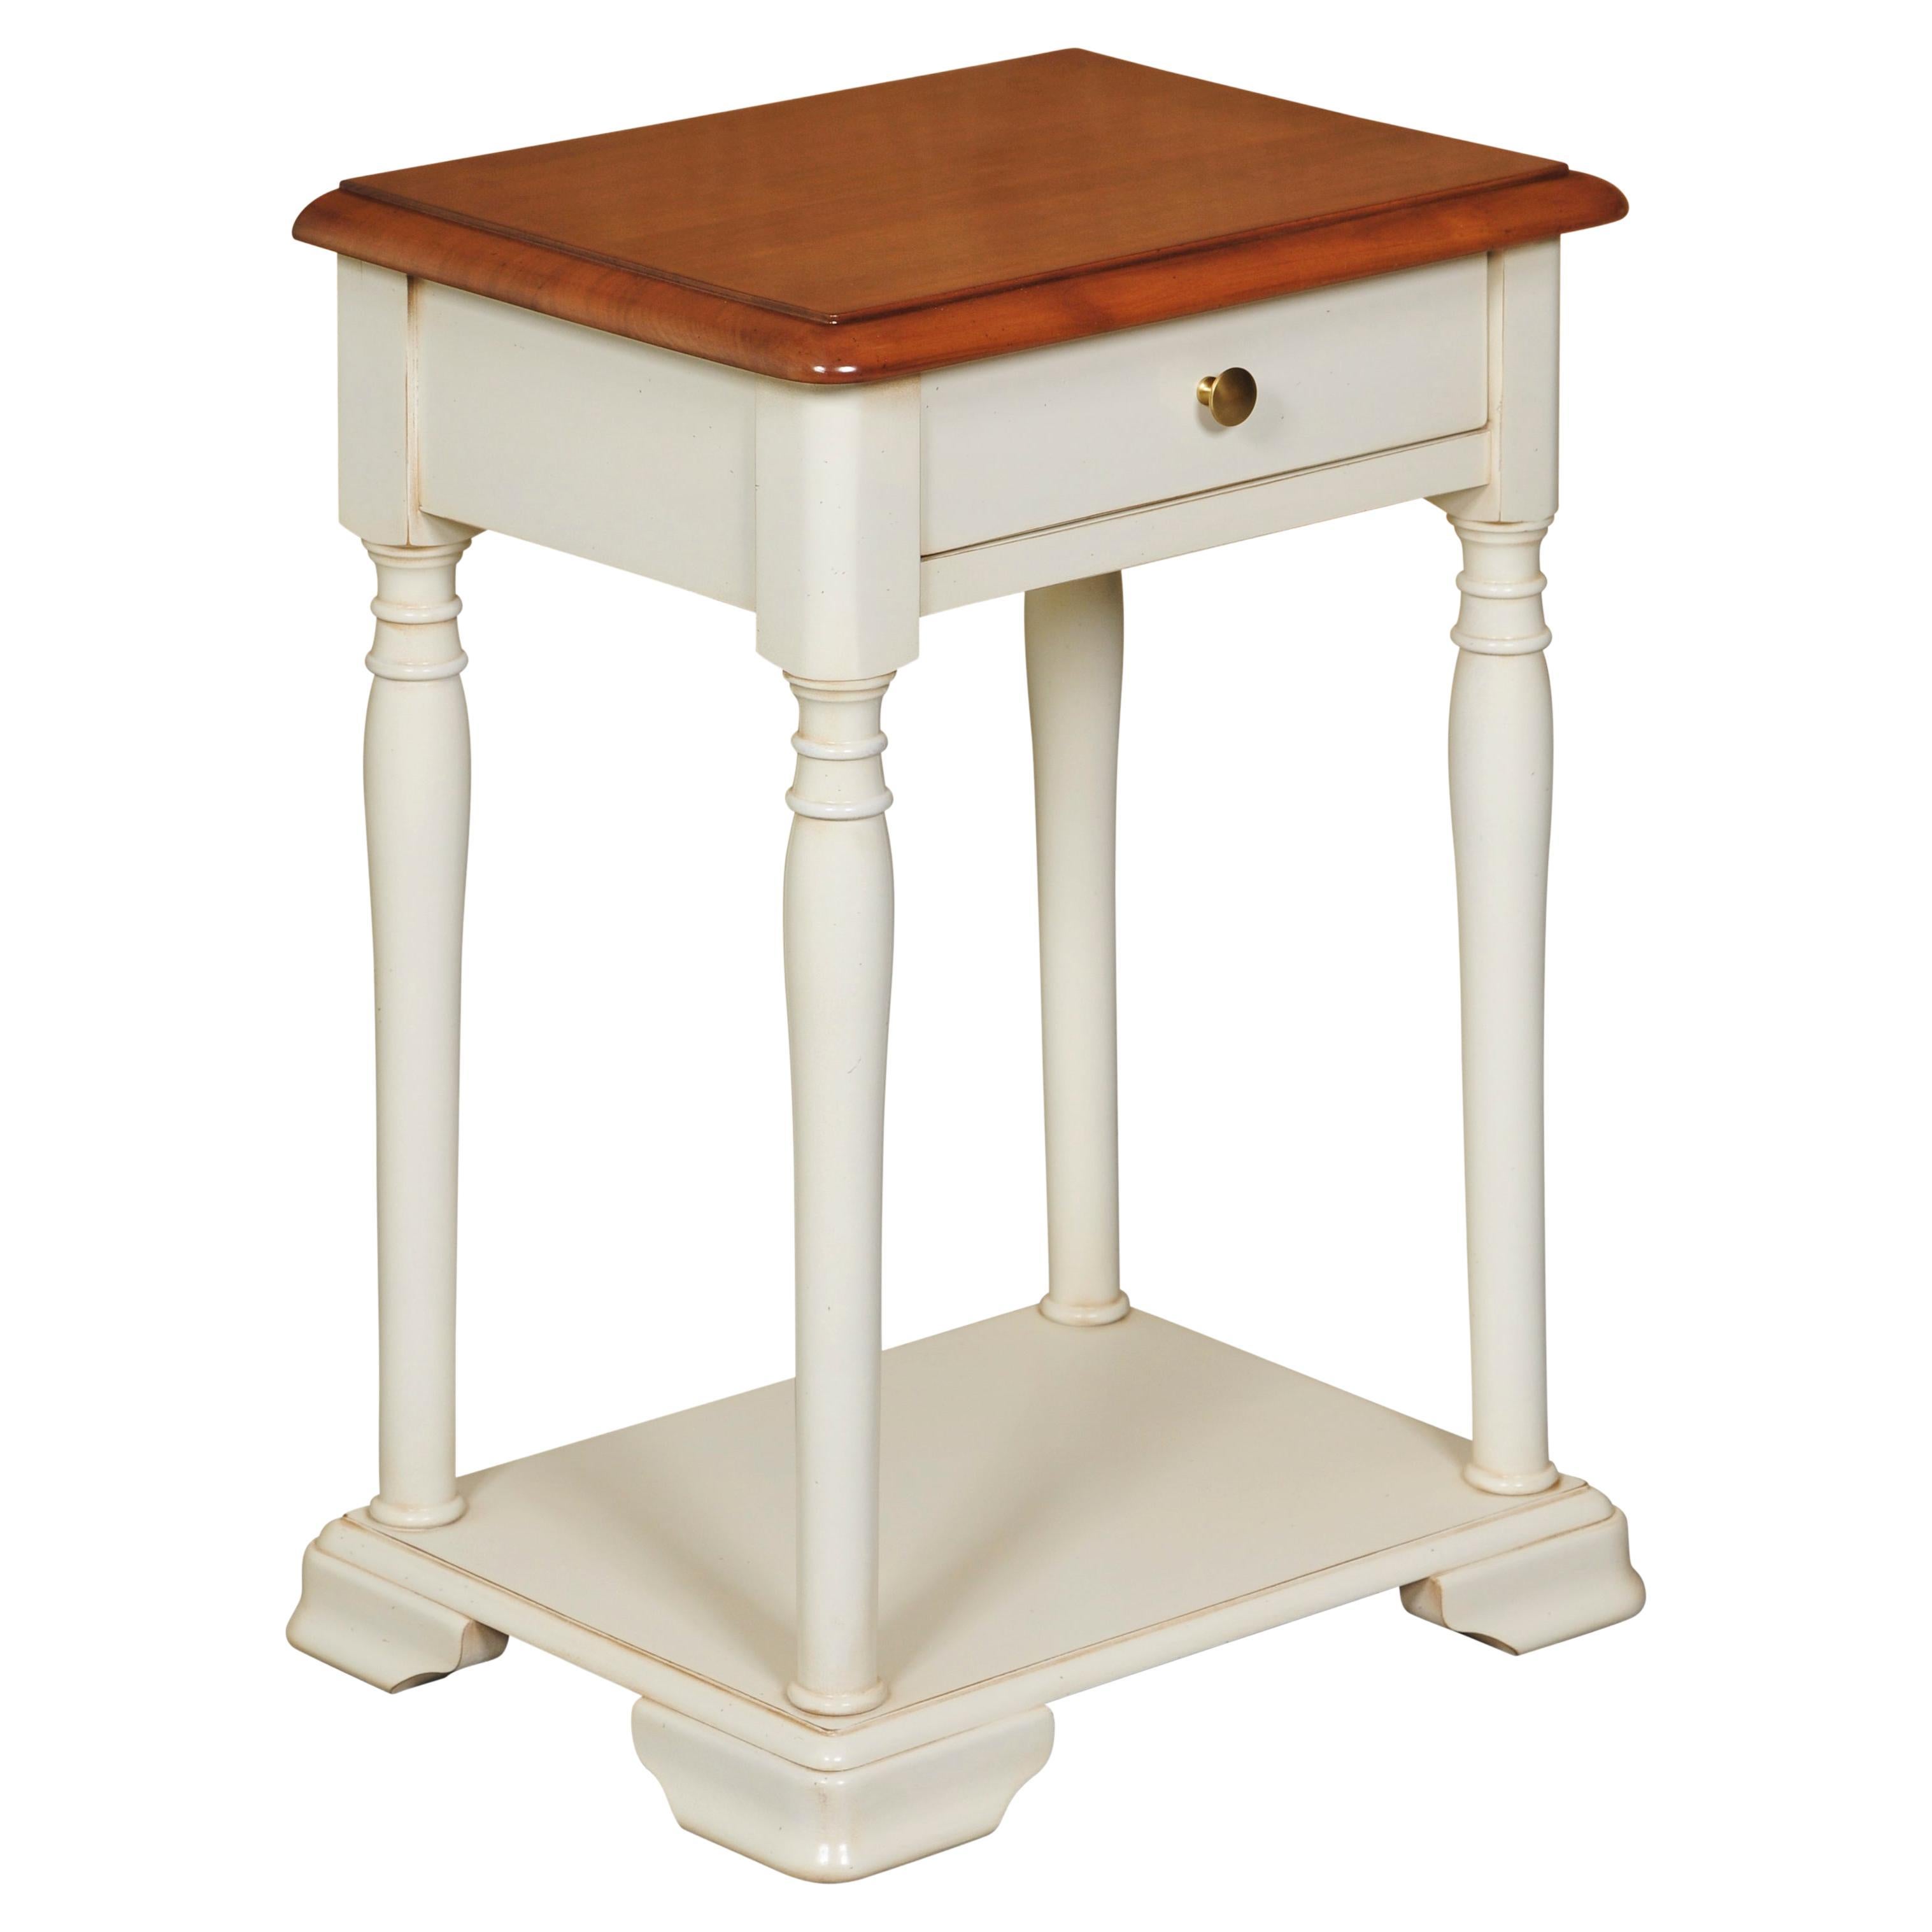 Louis Philippe Style Bedside Table, Blond Cherry and White, Cream Lacquered For Sale